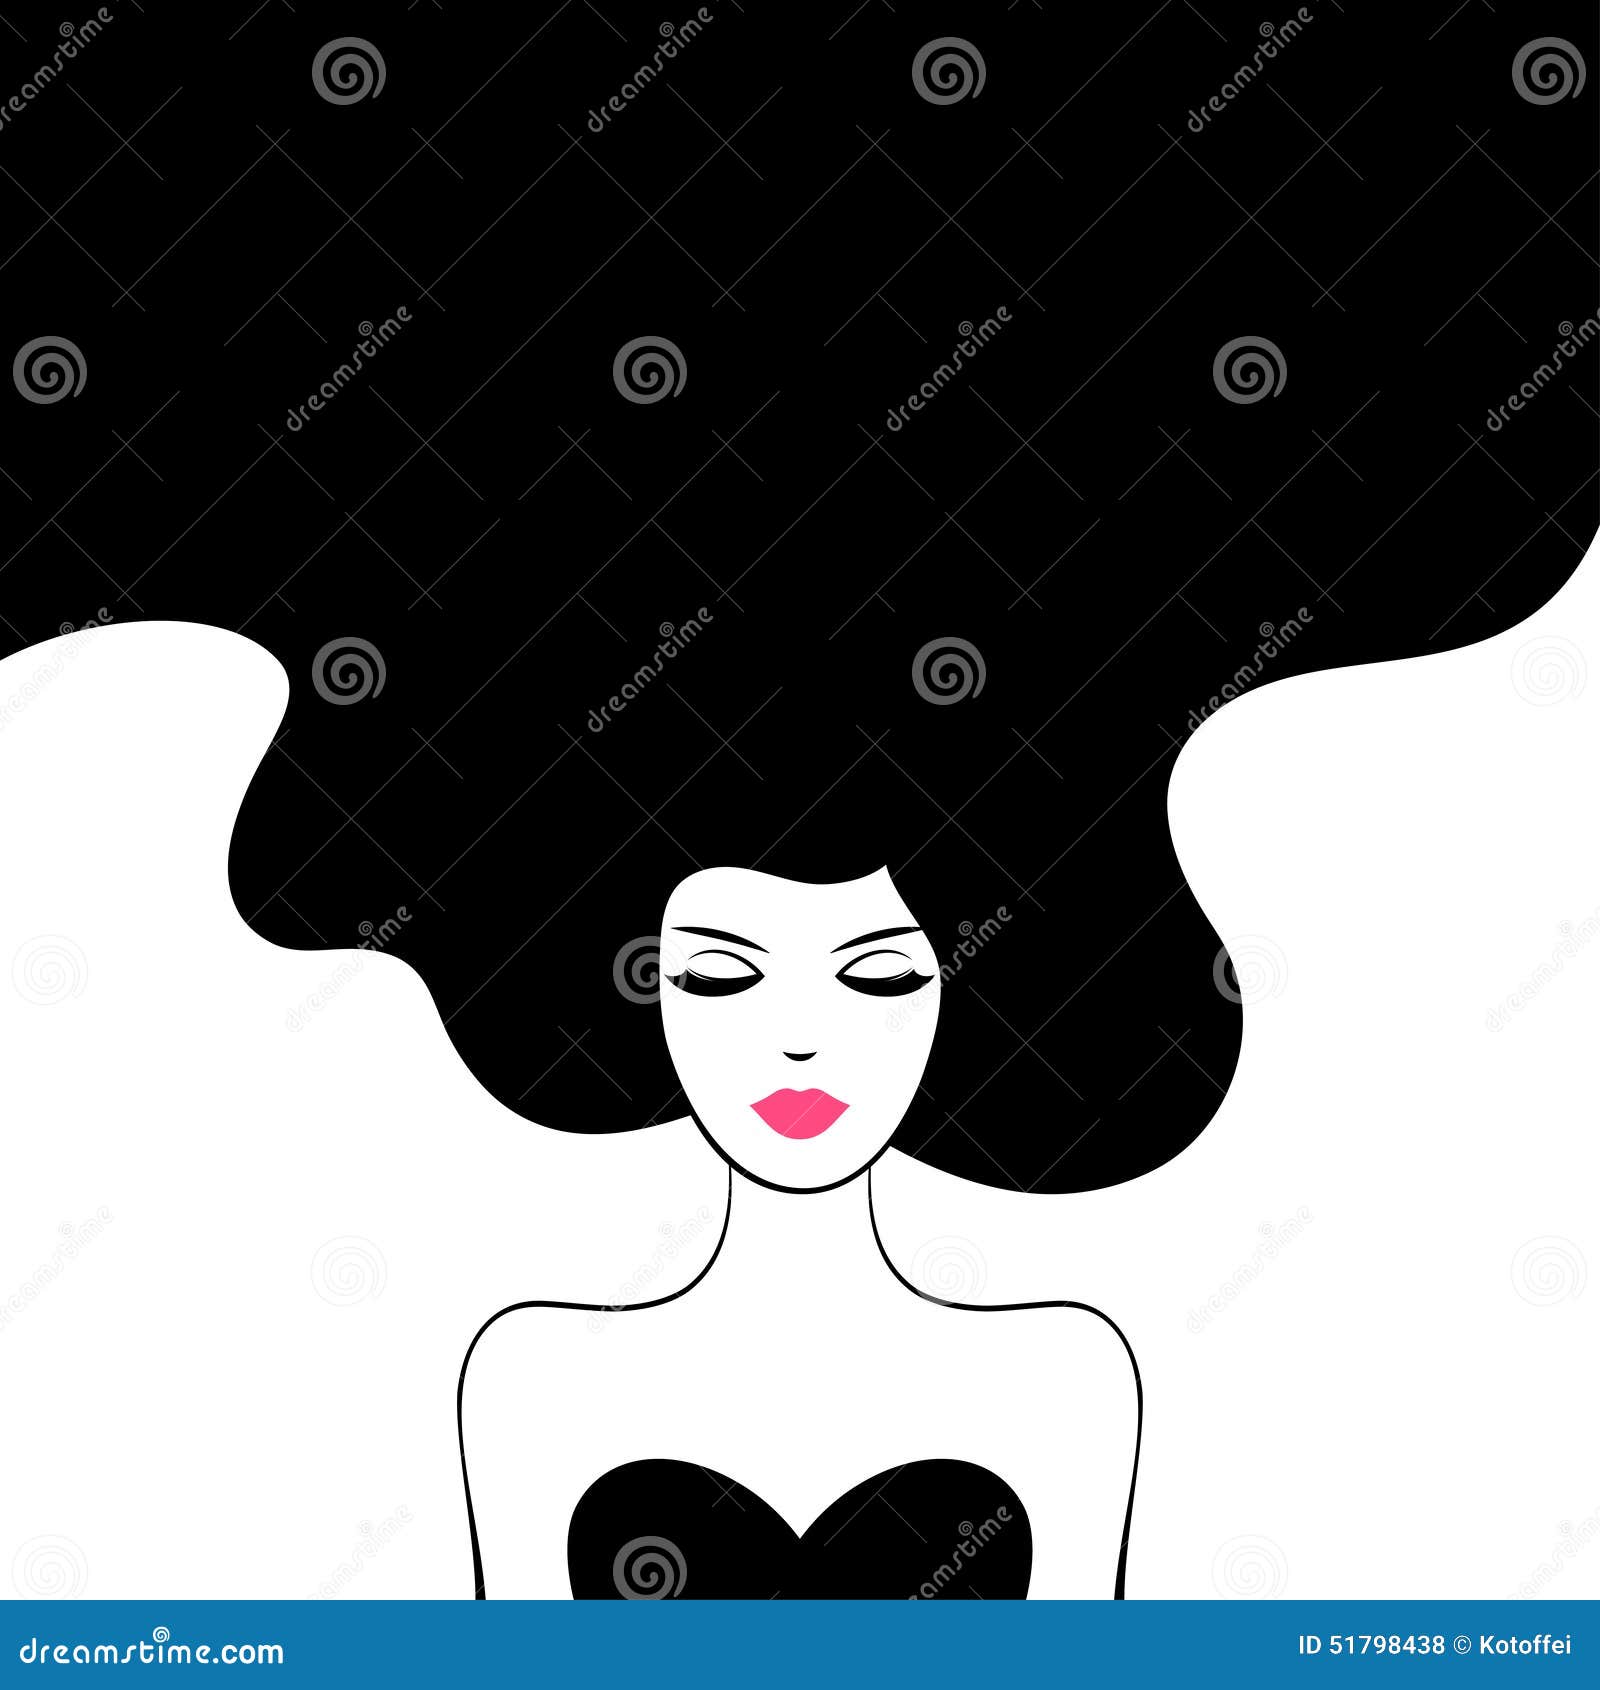 Vintage Fashion Woman With Long Hair Stock Vector - Image 